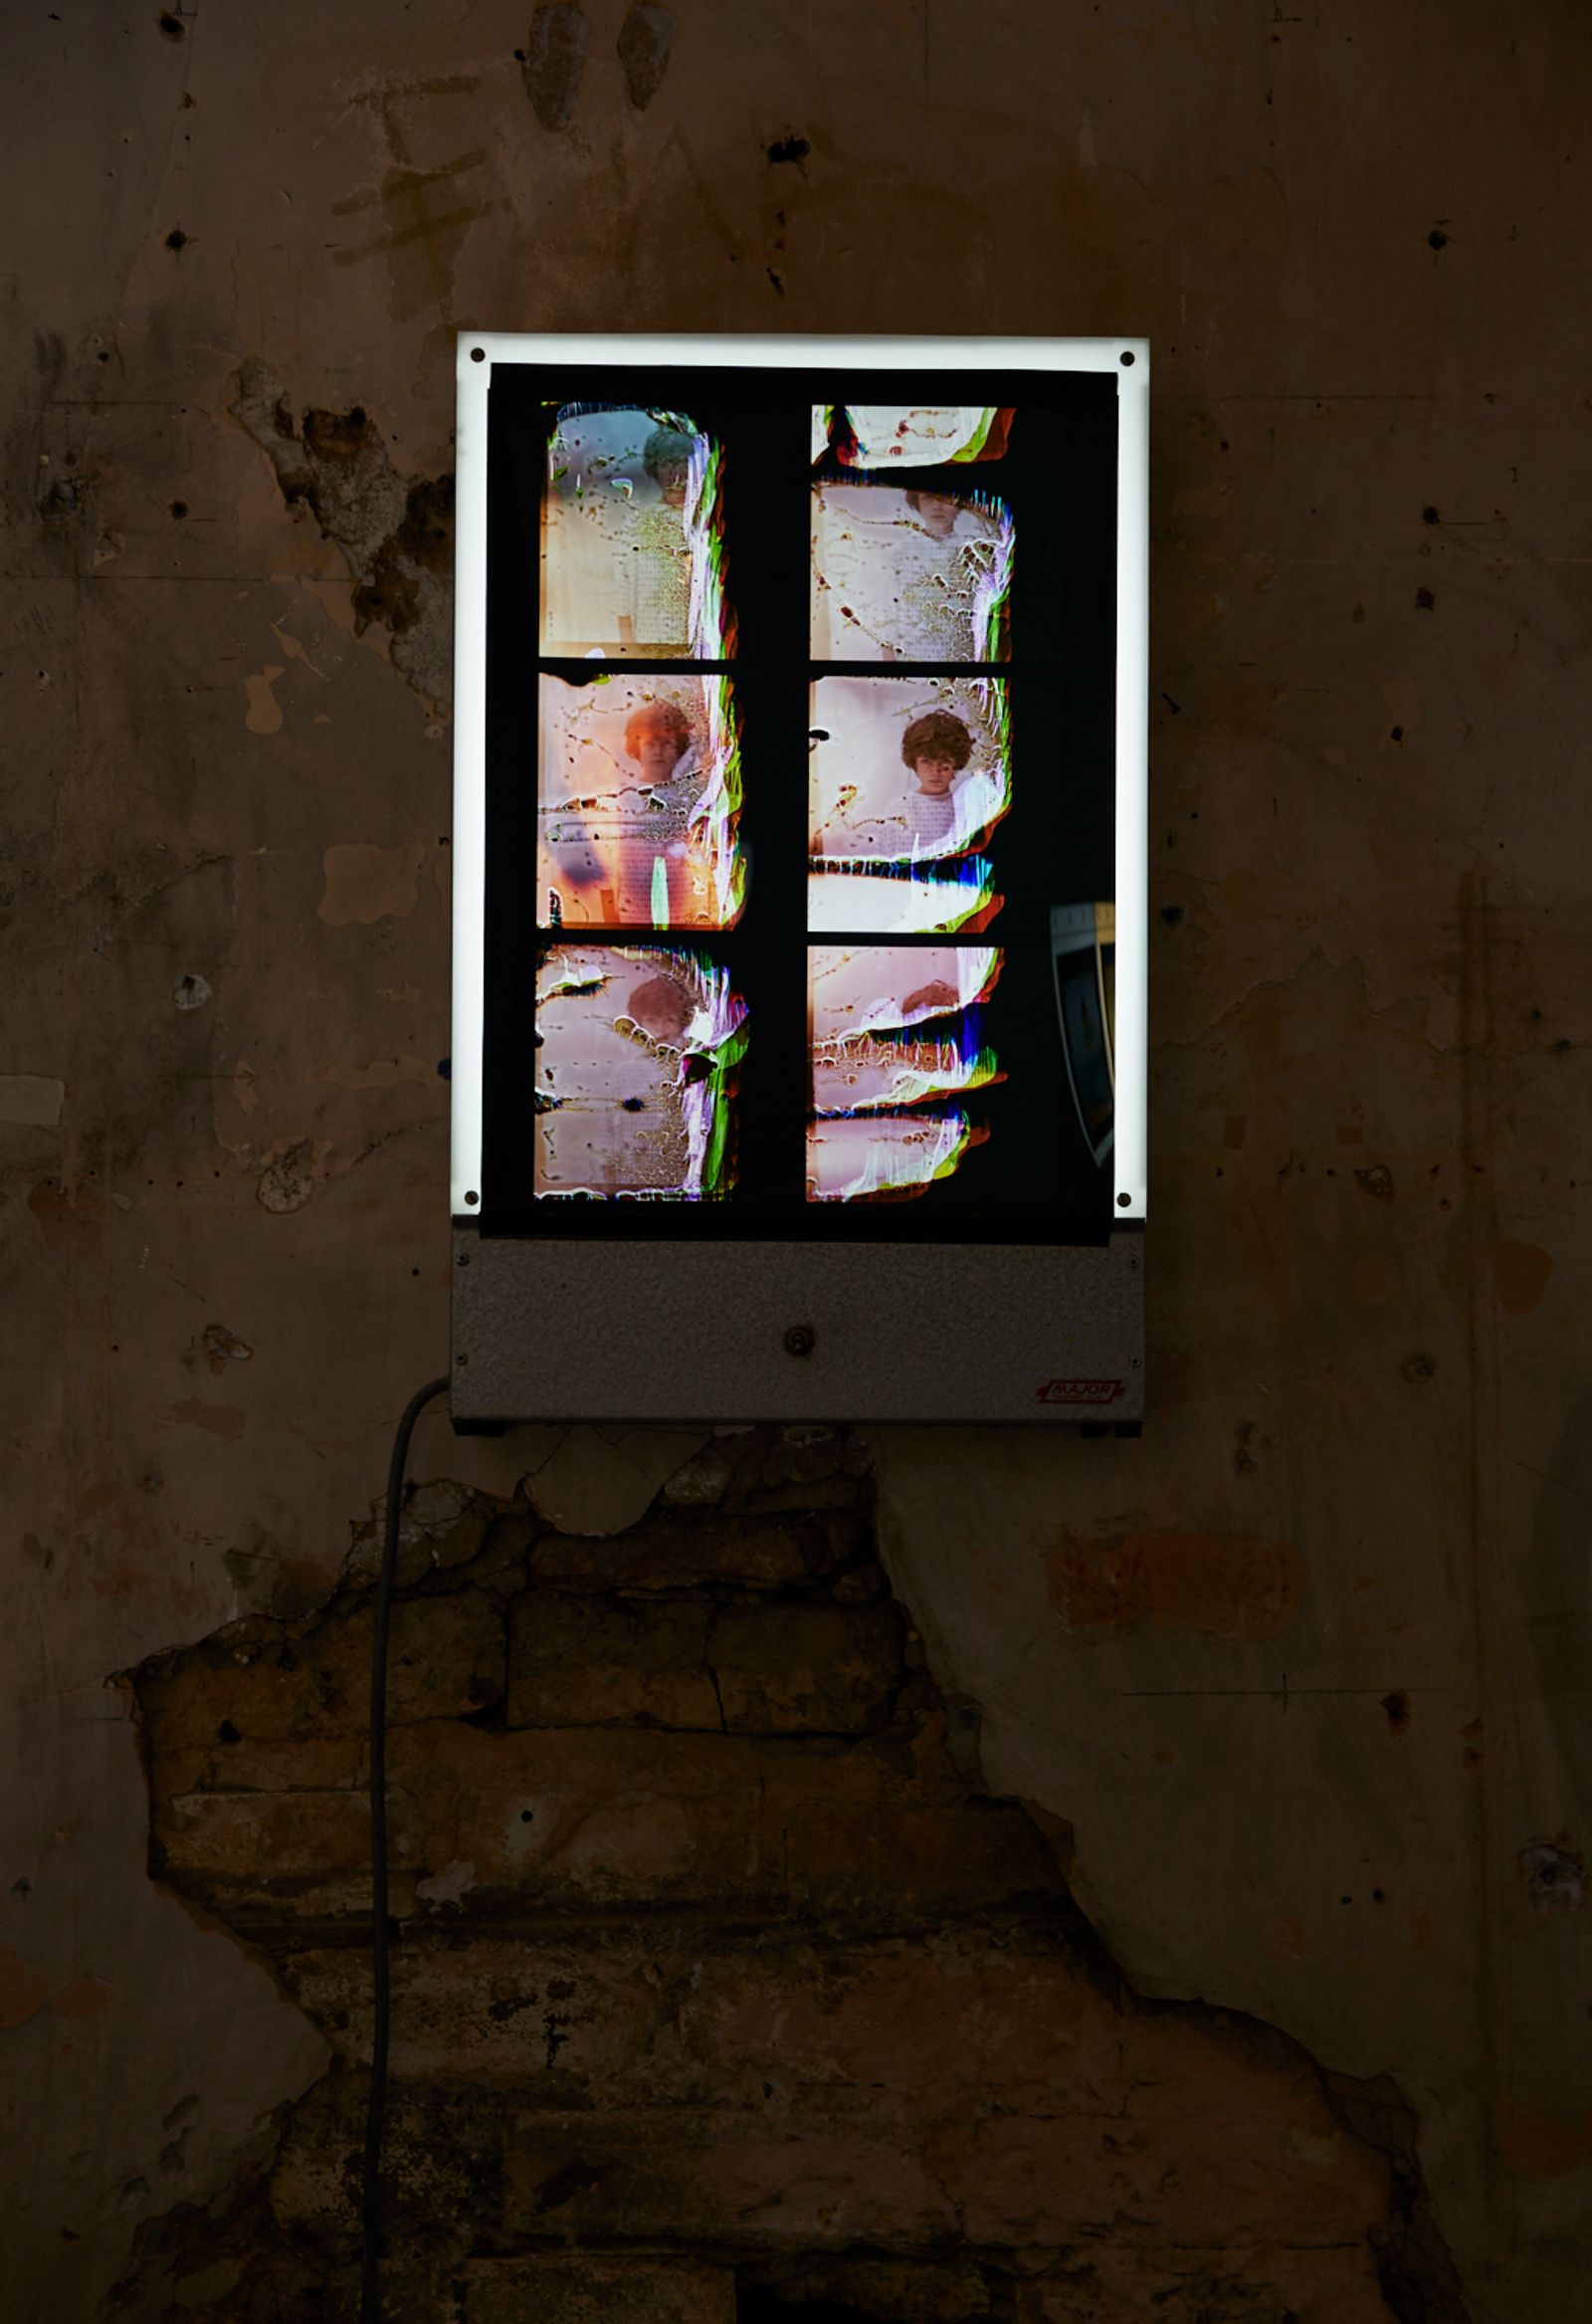 © Rhiannon Adam - Installation shot. View of Duratrans contact sheet of Noah's film roll displayed on reclaimed hospital x-ray viewer